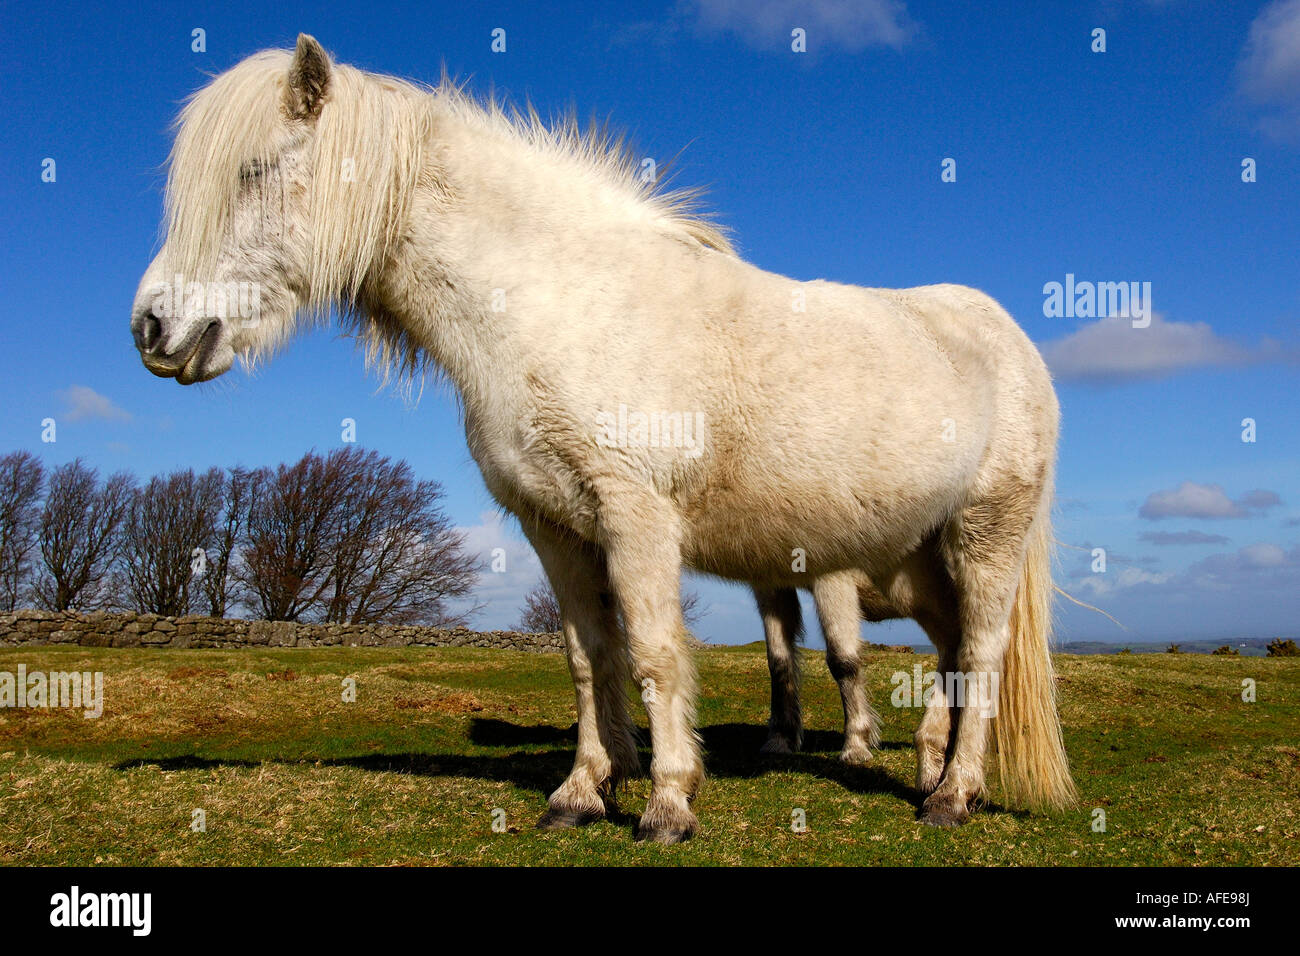 White Dartmoor Pony standing very close to the camera in side profile under a bright blue summer sky Stock Photo